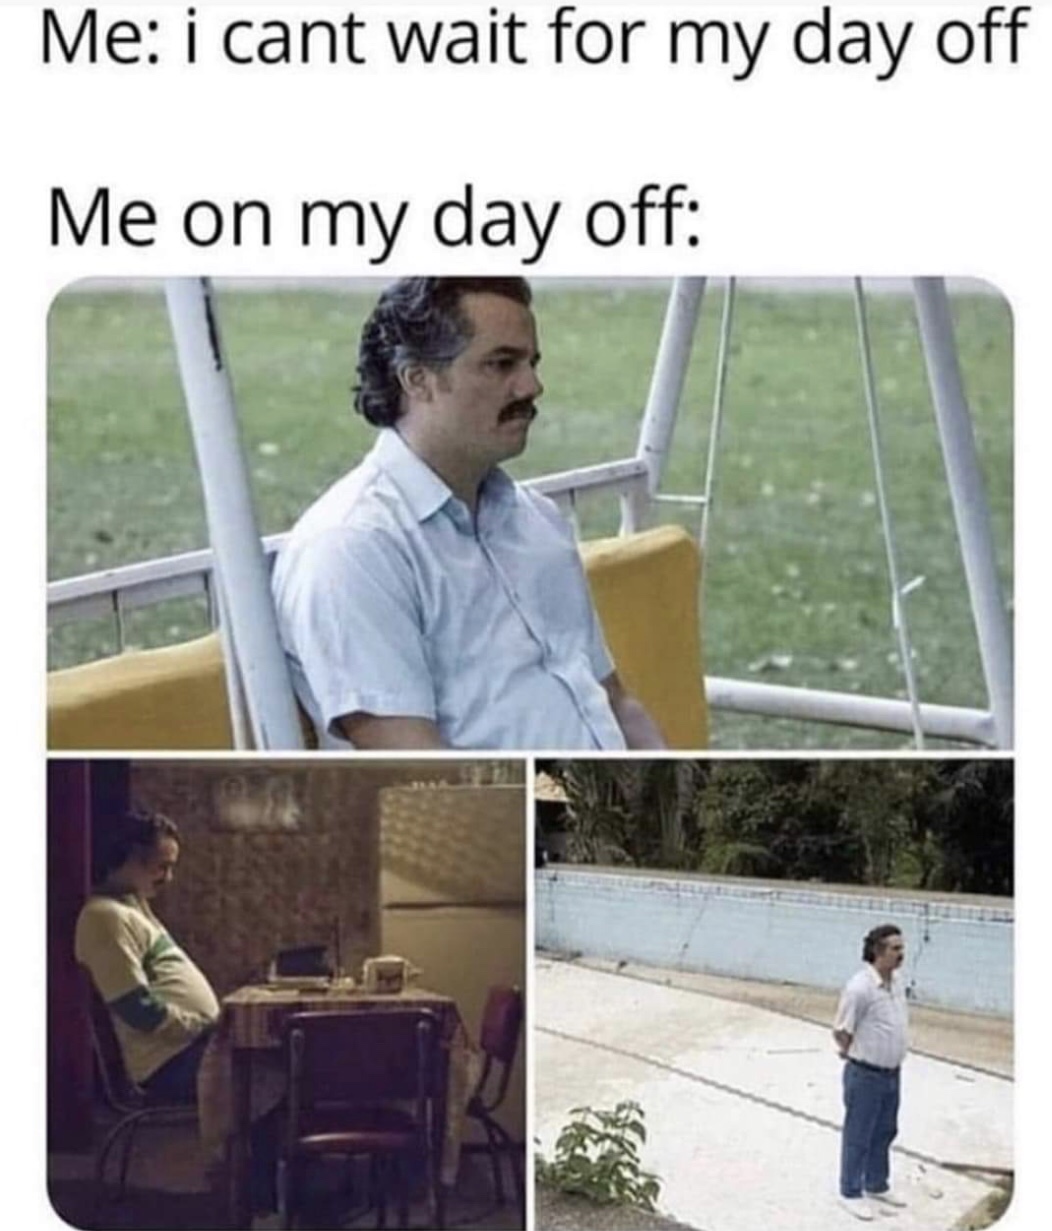 me on my day off meme - Me i cant wait for my day off Me on my day off